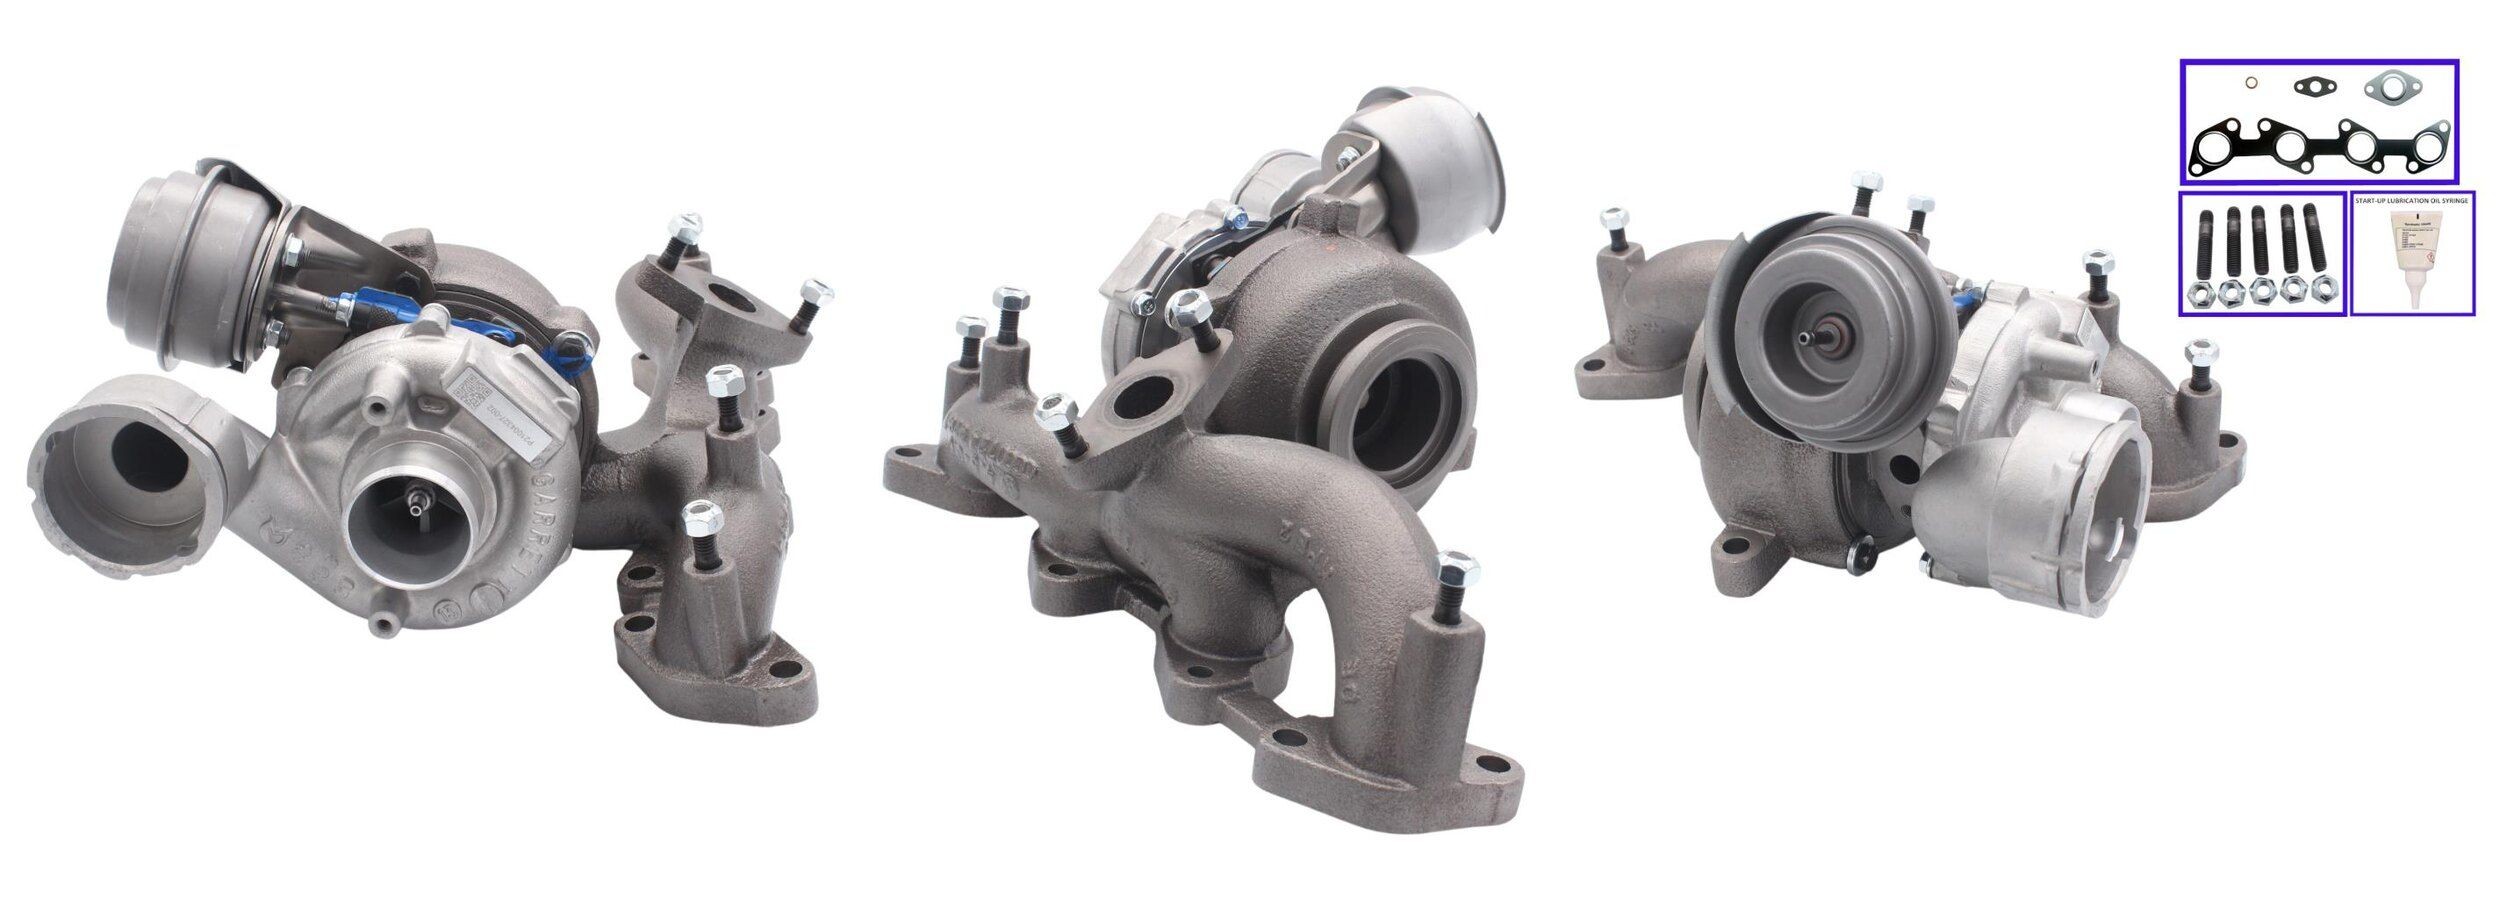 TURBO MOTOR PA7560621 Turbocharger Exhaust Turbocharger, Pneumatically controlled actuator, with gaskets/seals